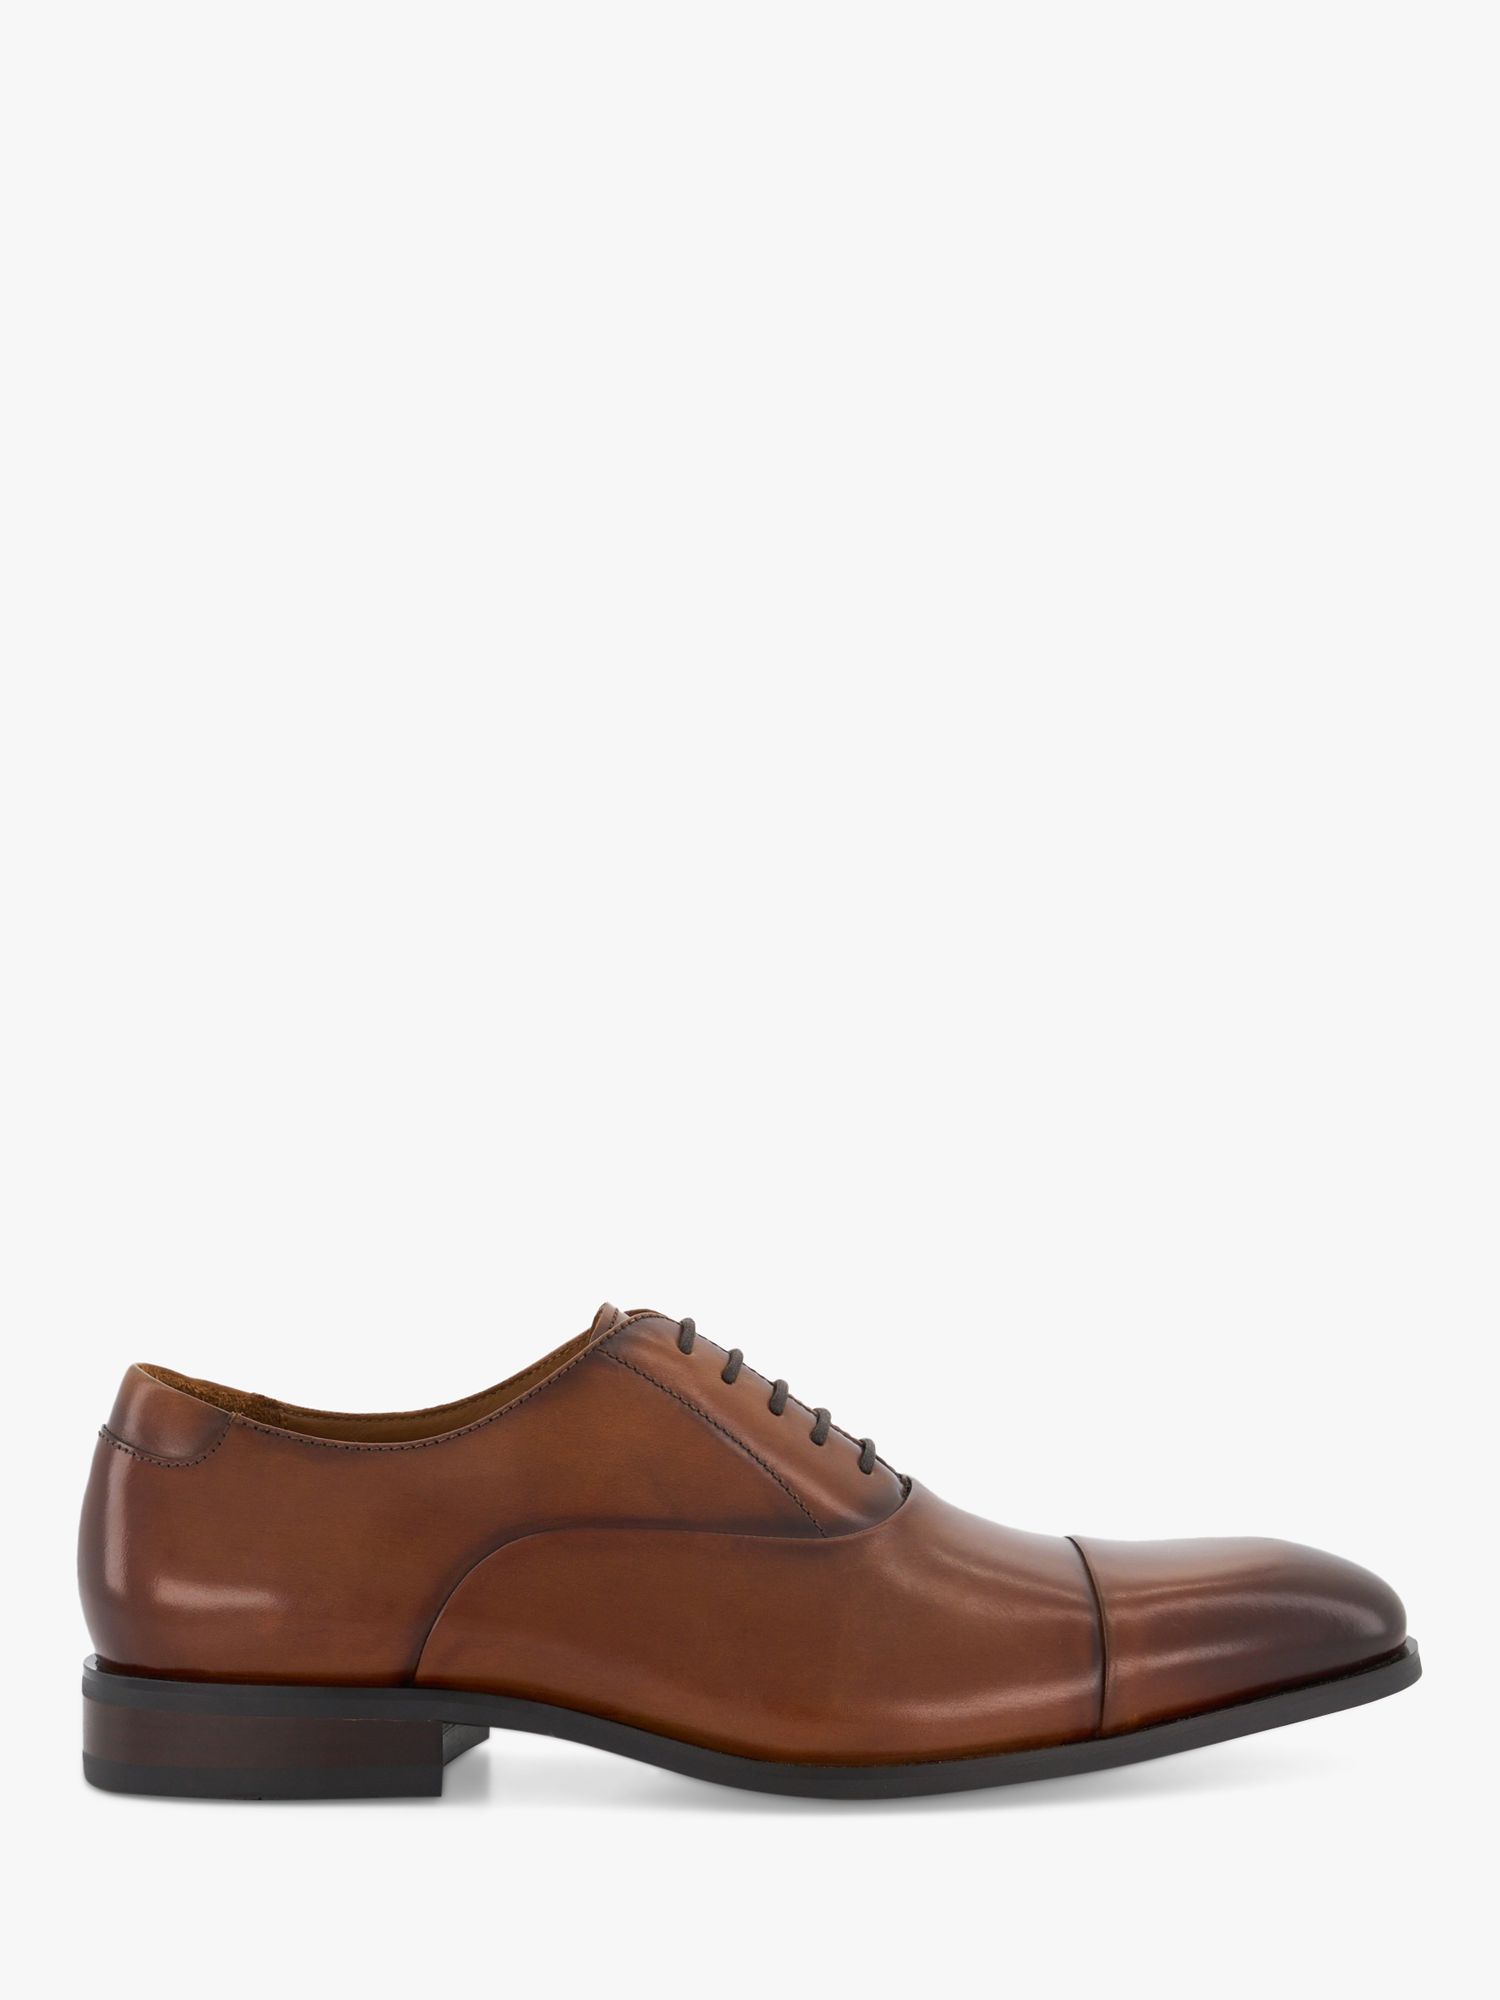 Tommy Hilfiger Jacob Leather Derby Shoes in Tan